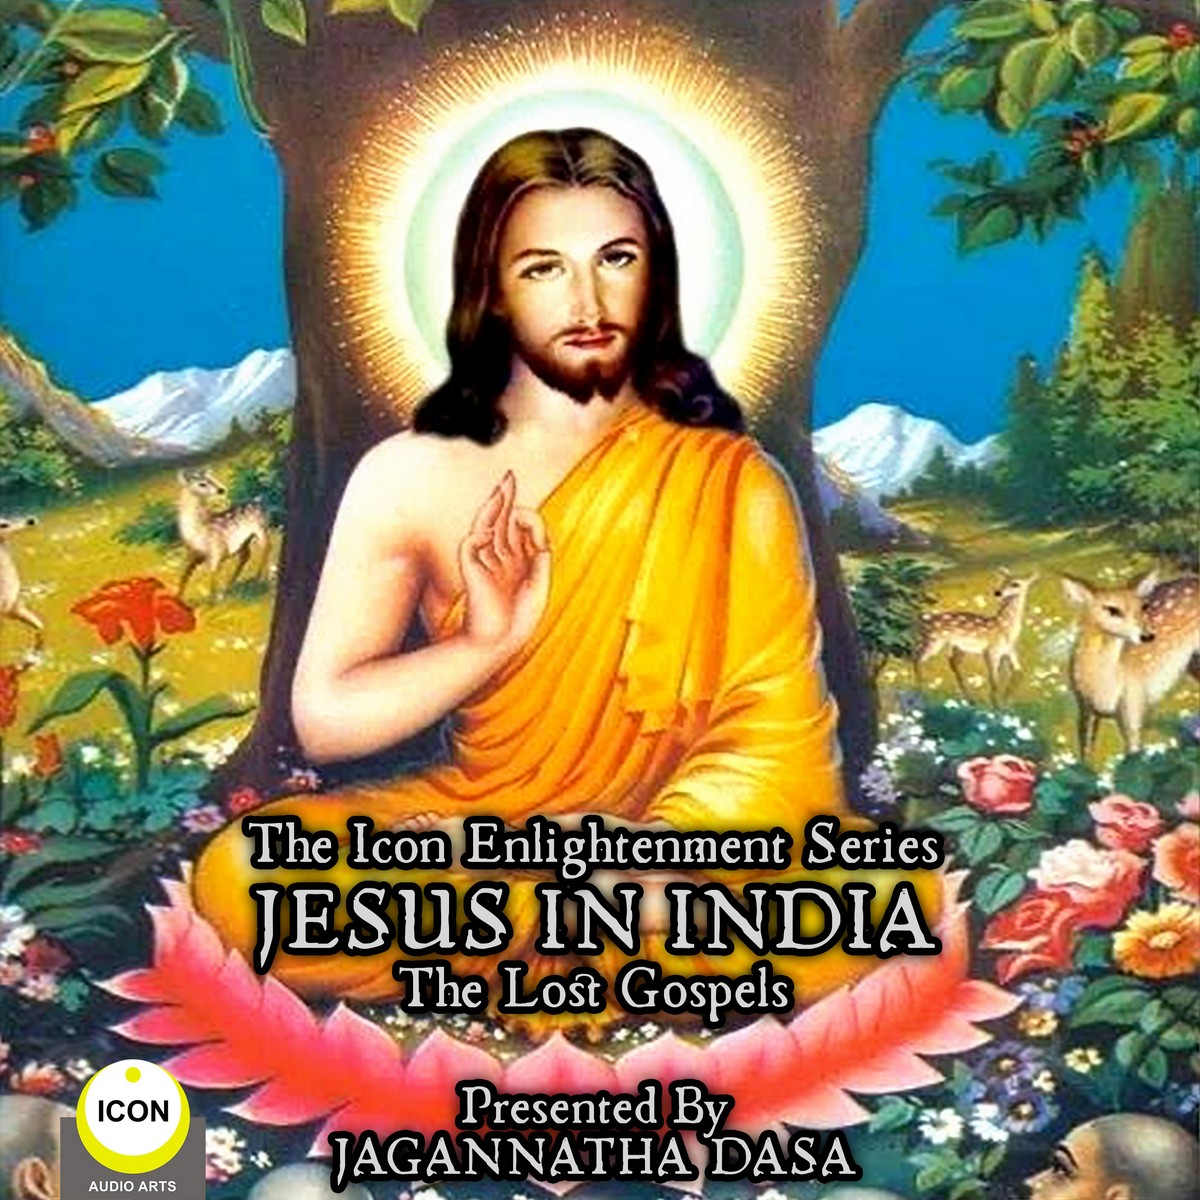 The Icon Enlightenment Series – Jesus In India The Lost Gospels